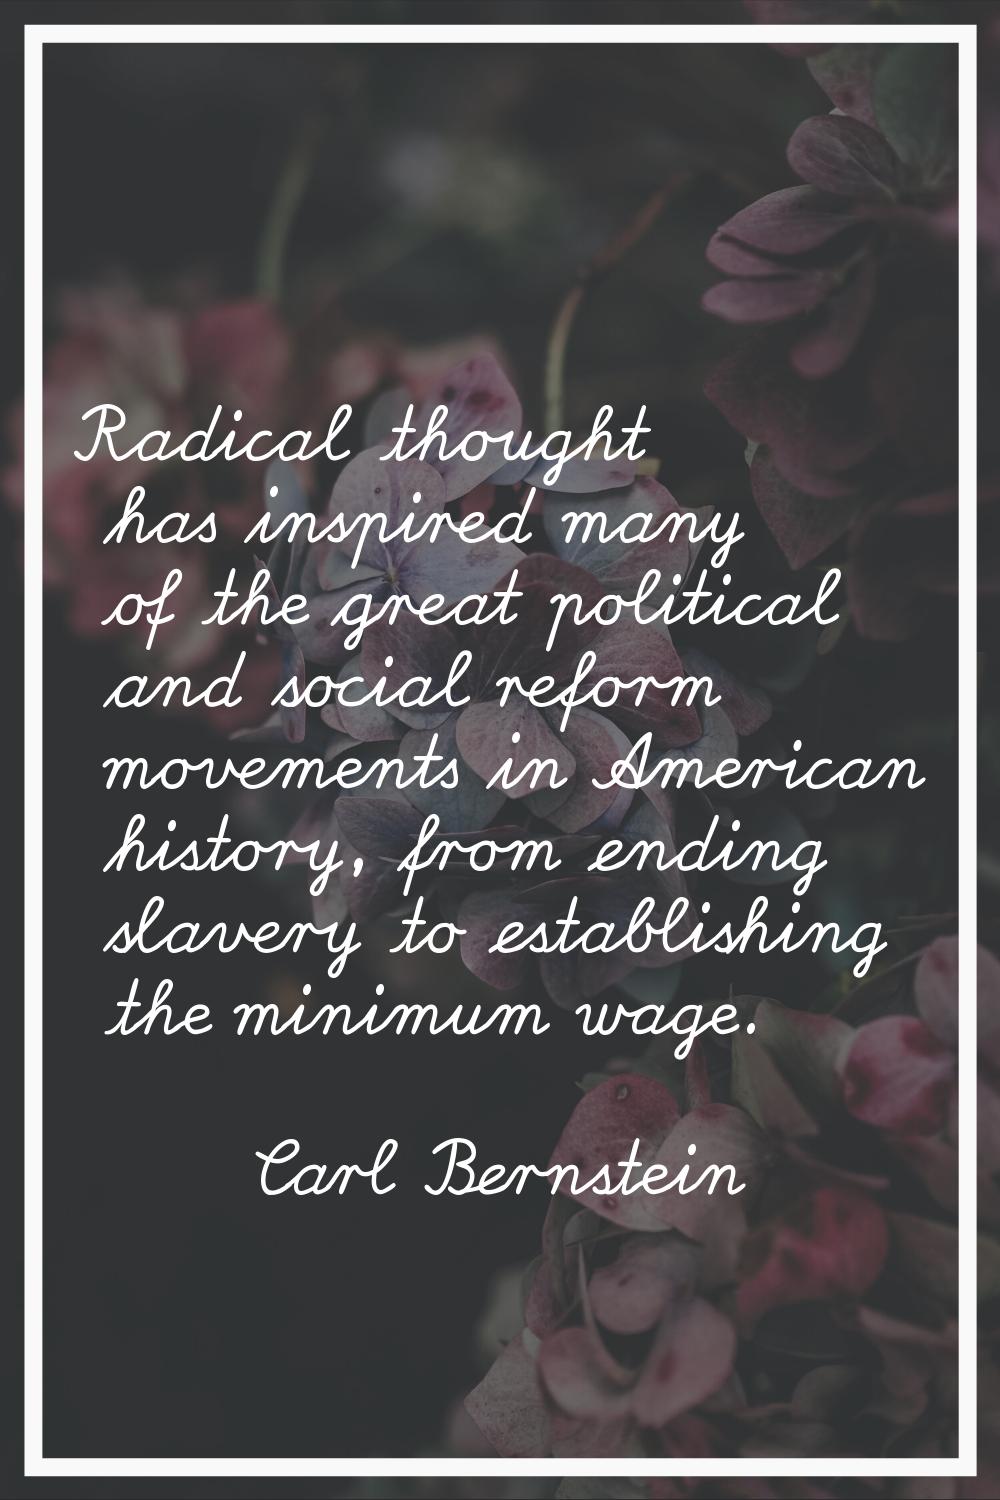 Radical thought has inspired many of the great political and social reform movements in American hi